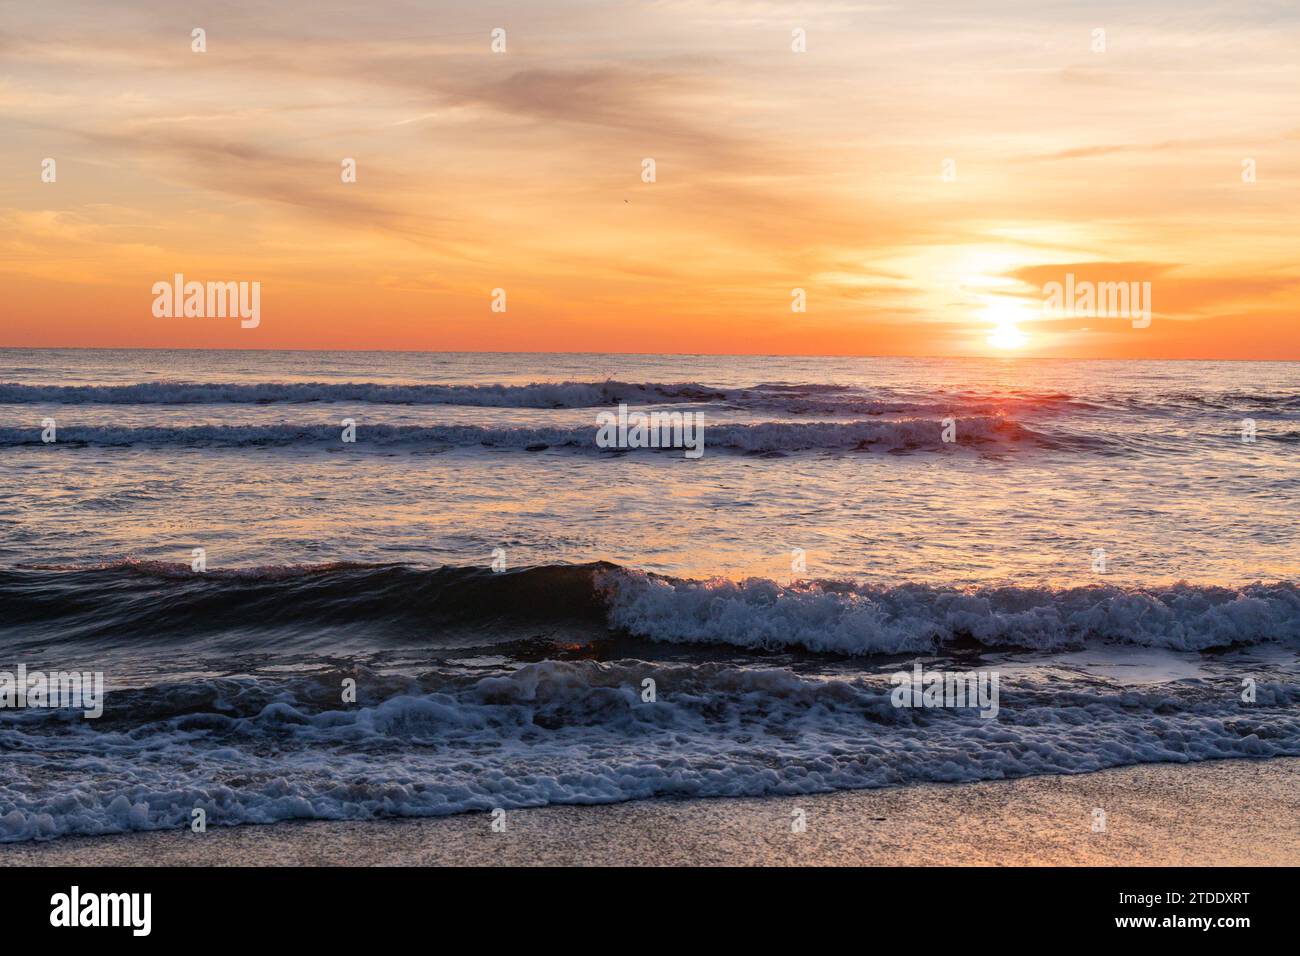 sunrise over the waves of the Atlantic Ocean from the beach Stock Photo